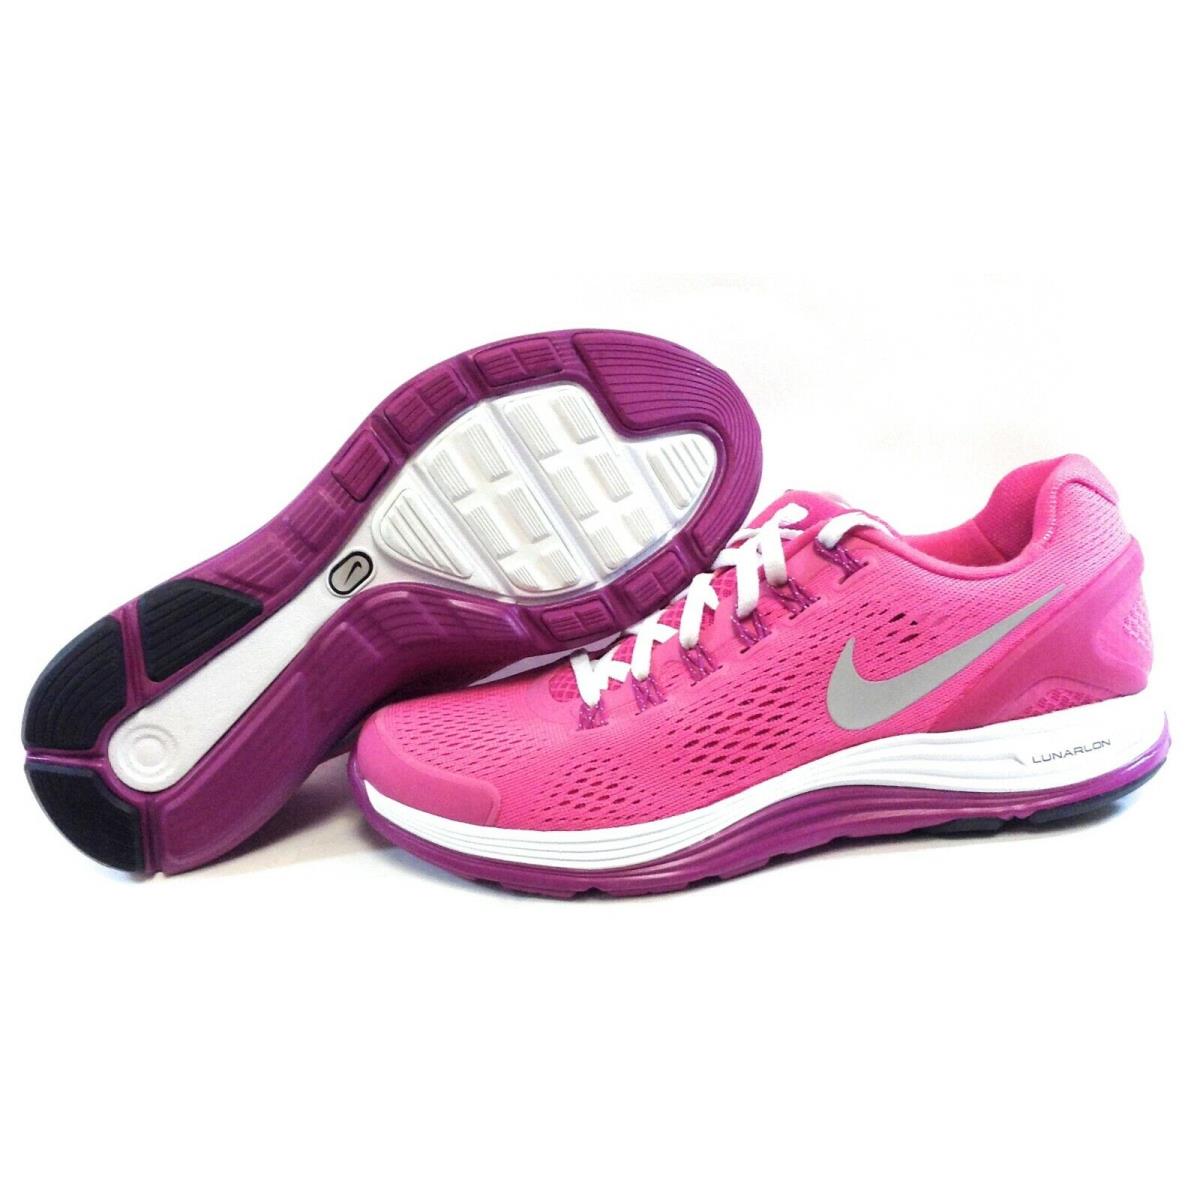 Girls Kids Youth Nike Lunarglide 4 525371 600 Desert Pink 2012 DS Sneakers Shoes - Pink